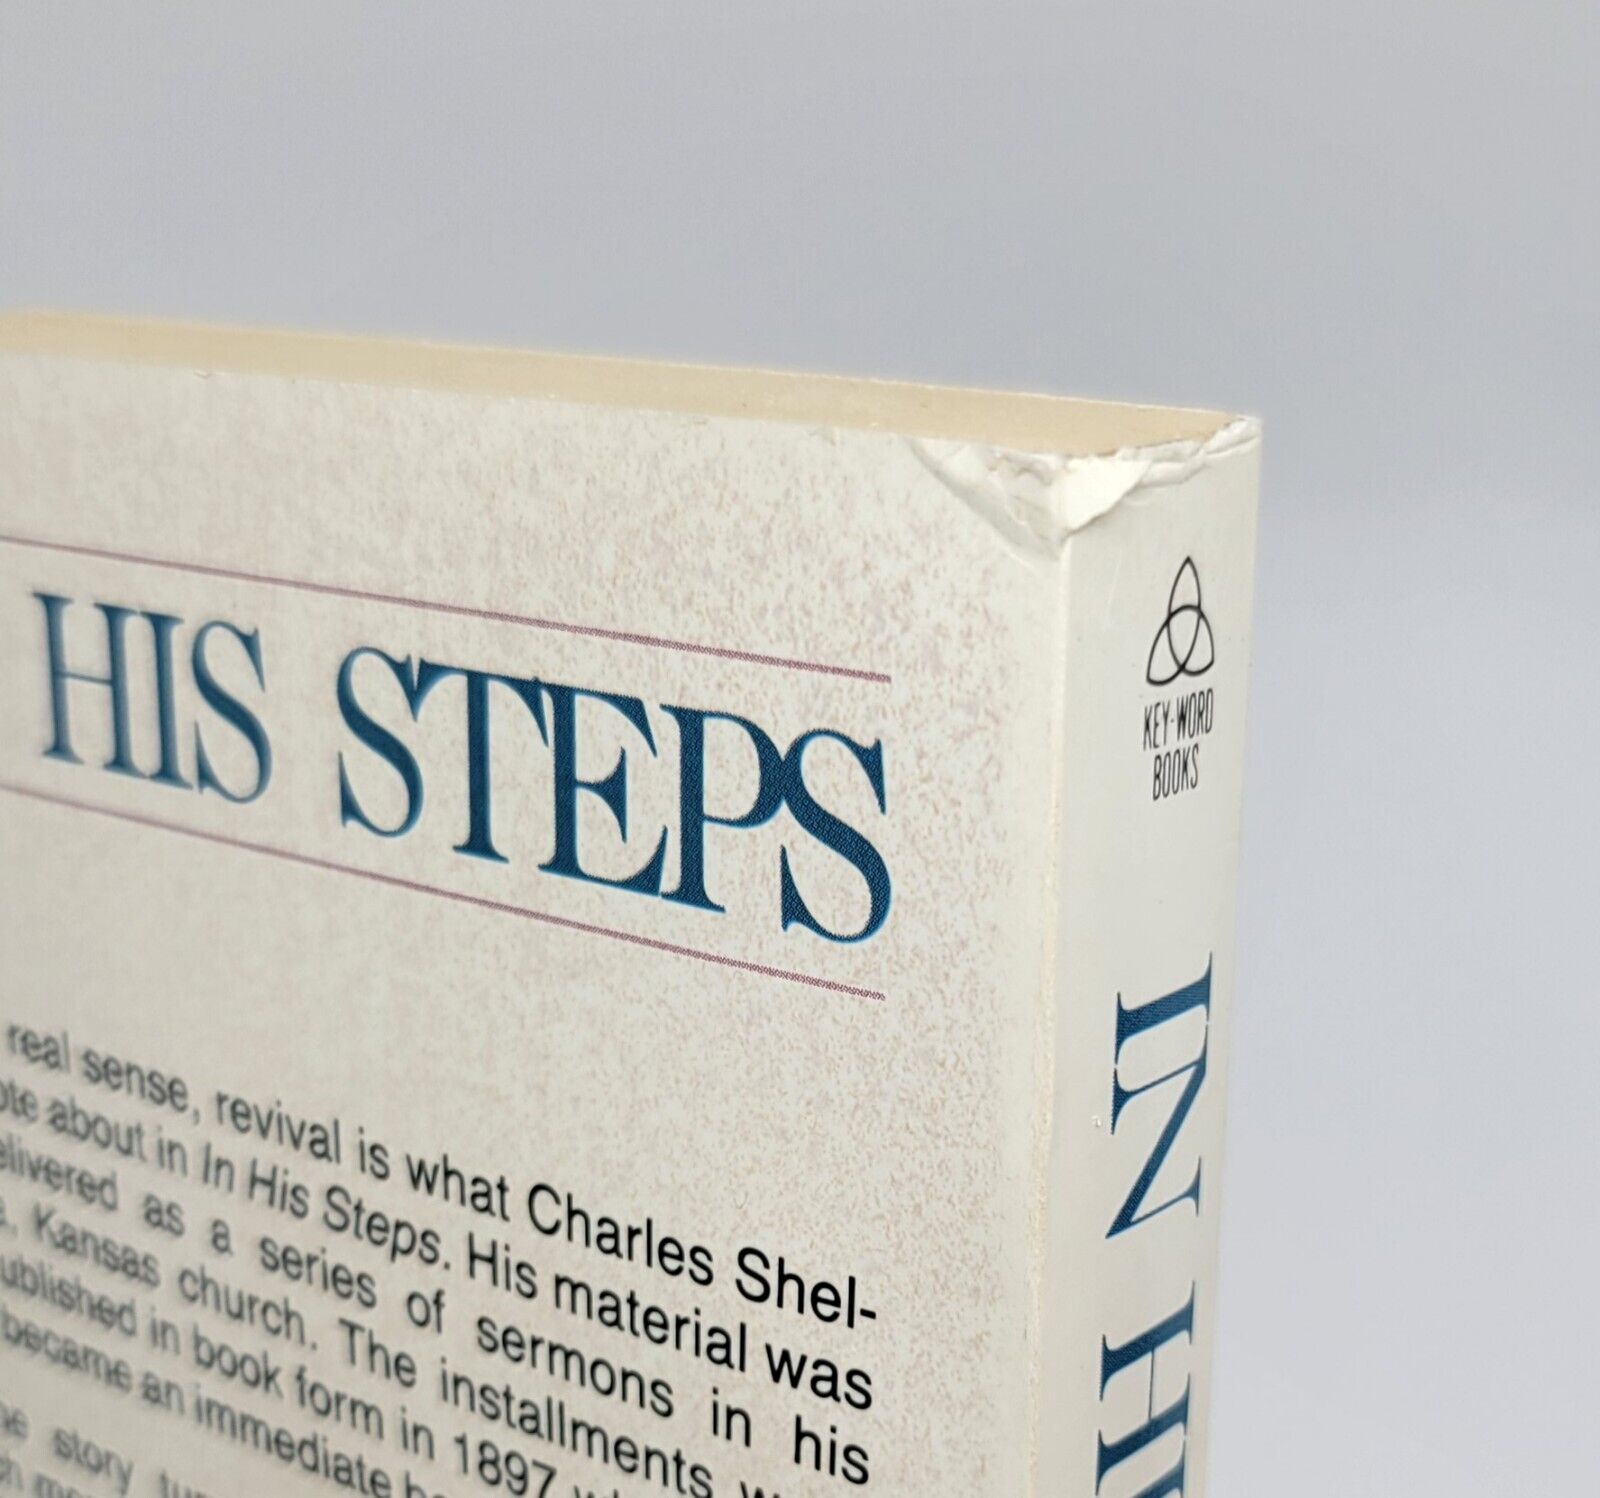 In His Steps by Charles M. Sheldon (1988, Mass Market)